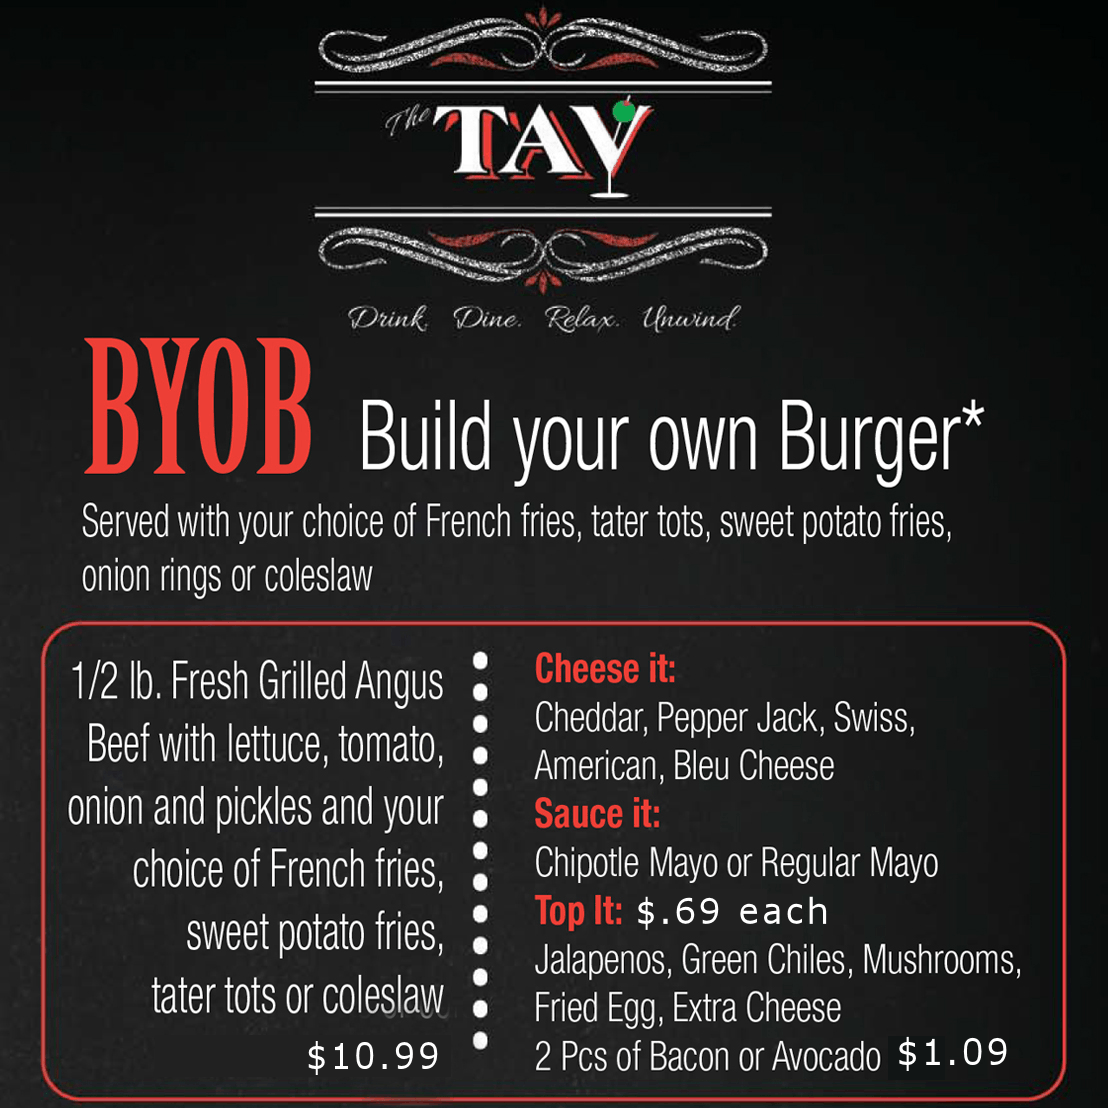 Build your own burger with Cheddar, Pepper Jack, Swiss, American or Bleu Cheese. Special sauses are Chipotle Mayo or Regular Mayo. Jalapenos, Green Chiles, Mushrooms, Fried Egg, or extra cheese for topings